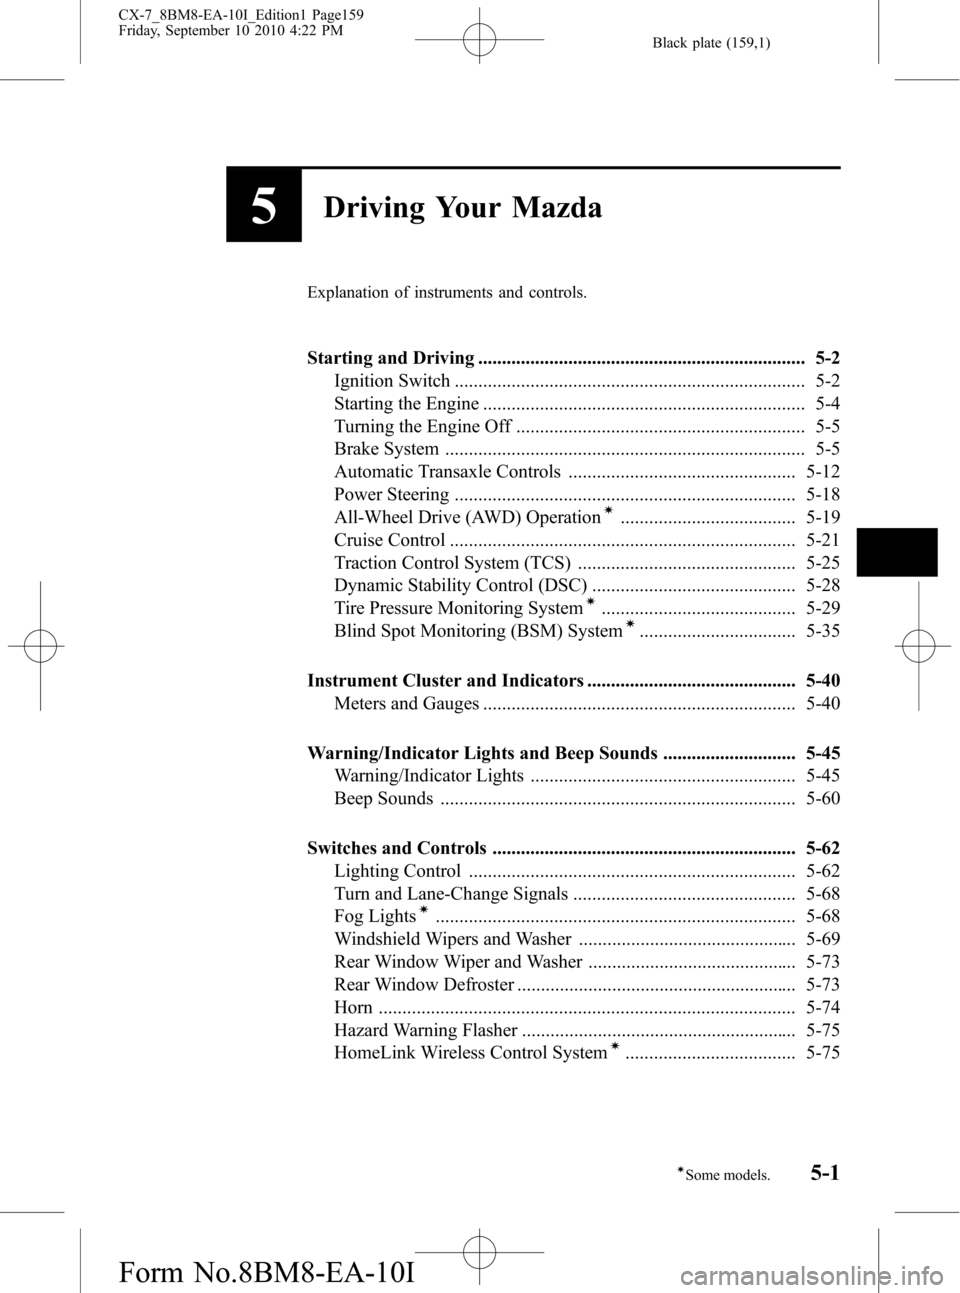 MAZDA MODEL CX-7 2011  Owners Manual (in English) Black plate (159,1)
5Driving Your Mazda
Explanation of instruments and controls.
Starting and Driving ..................................................................... 5-2
Ignition Switch ........